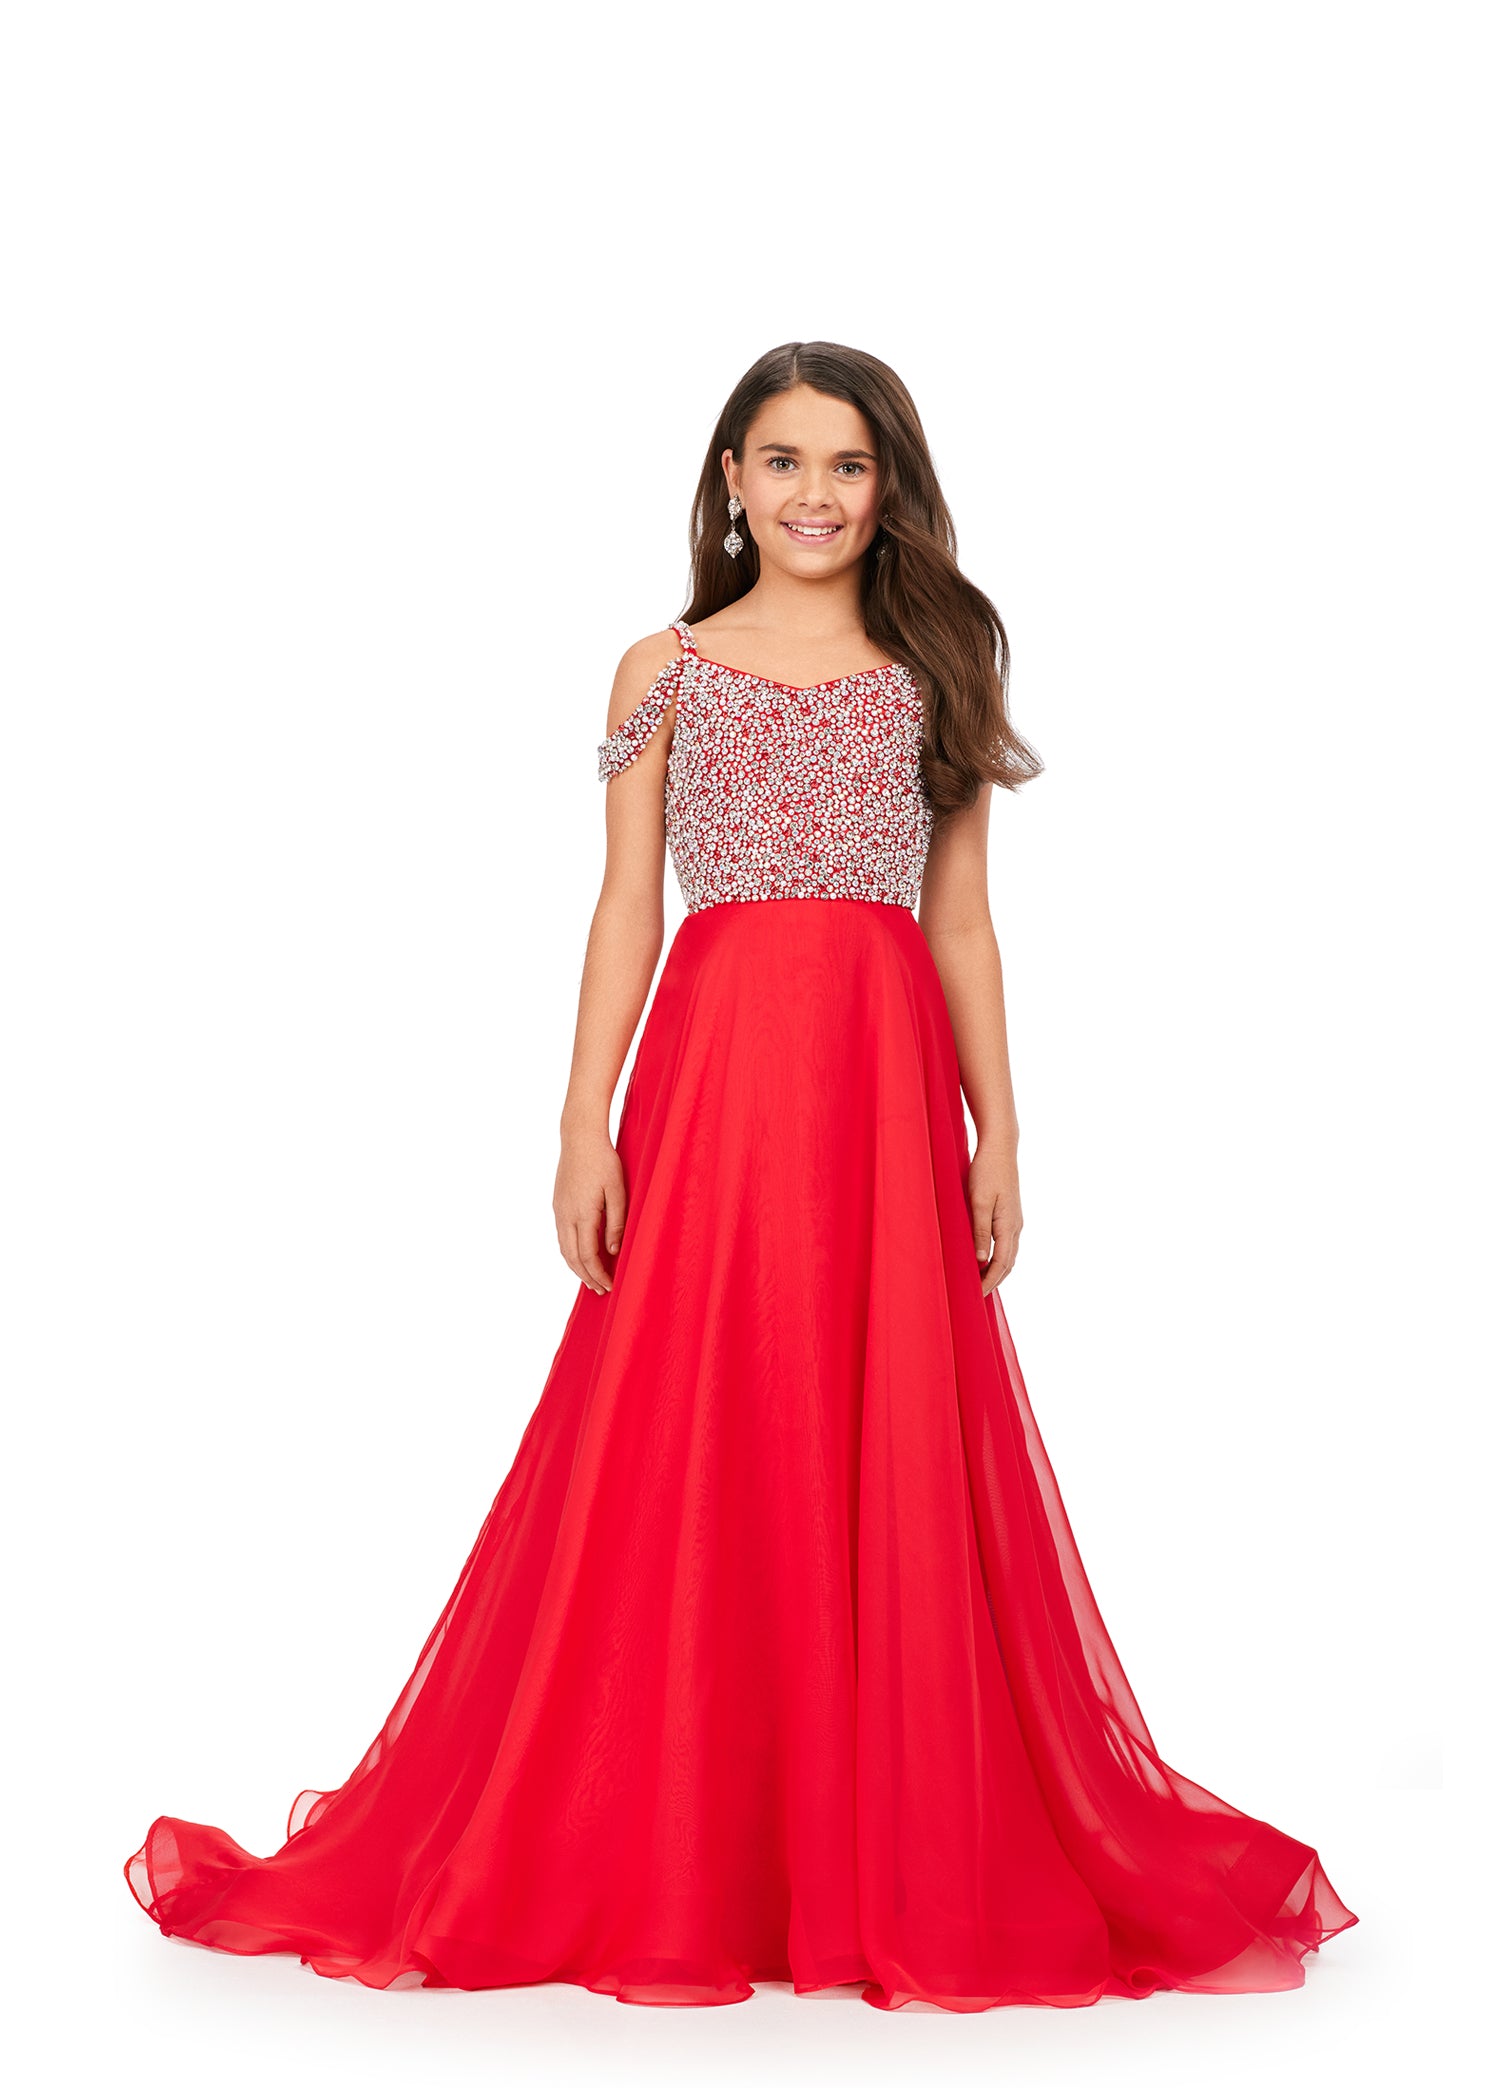 Ashley Lauren Kids 8220 Beaded Bustier A-Line Off The Shoulder Sweetheart Neckline Chiffon Gown. We are obsessed with this elegant gown! The fully beaded bodice features off shoulder straps and a fabulous, flowy chiffon skirt.